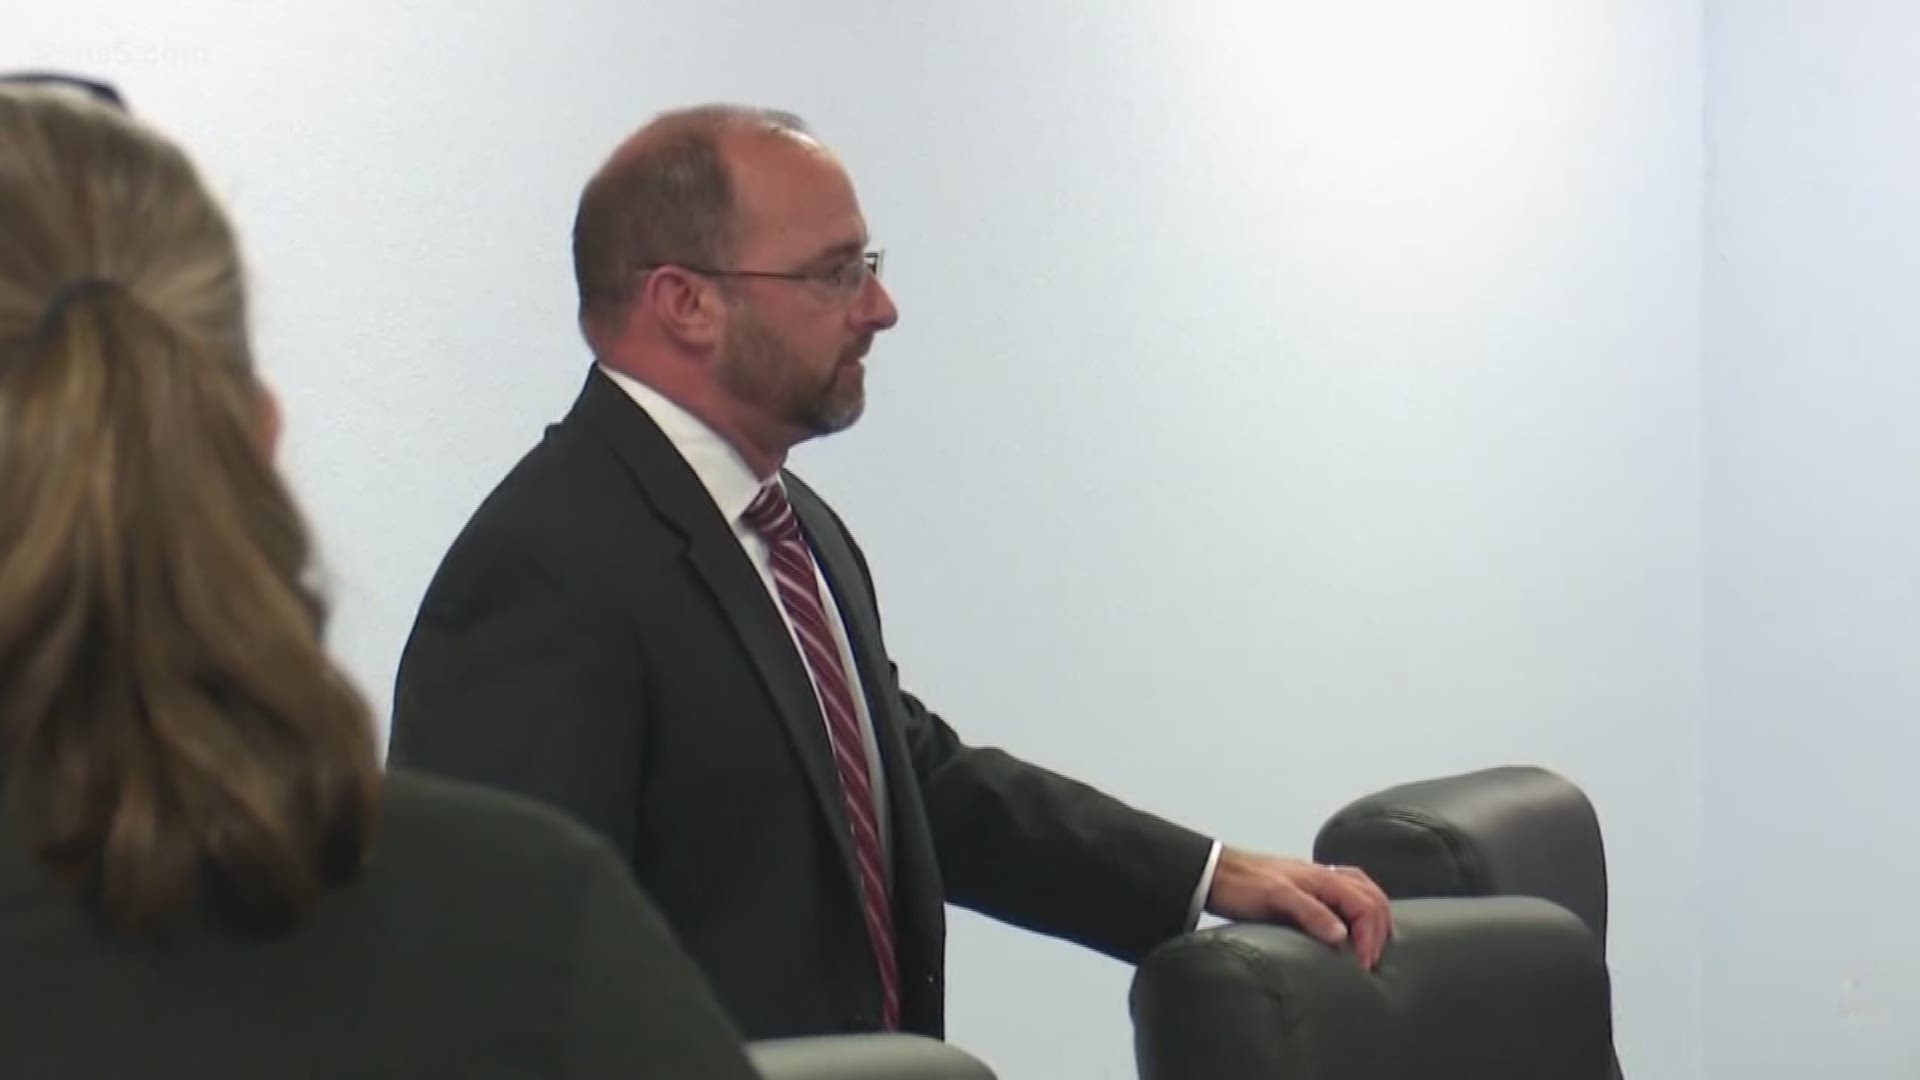 Dr. Trent Lovette is accused of inappropriately touching a student at a football game.